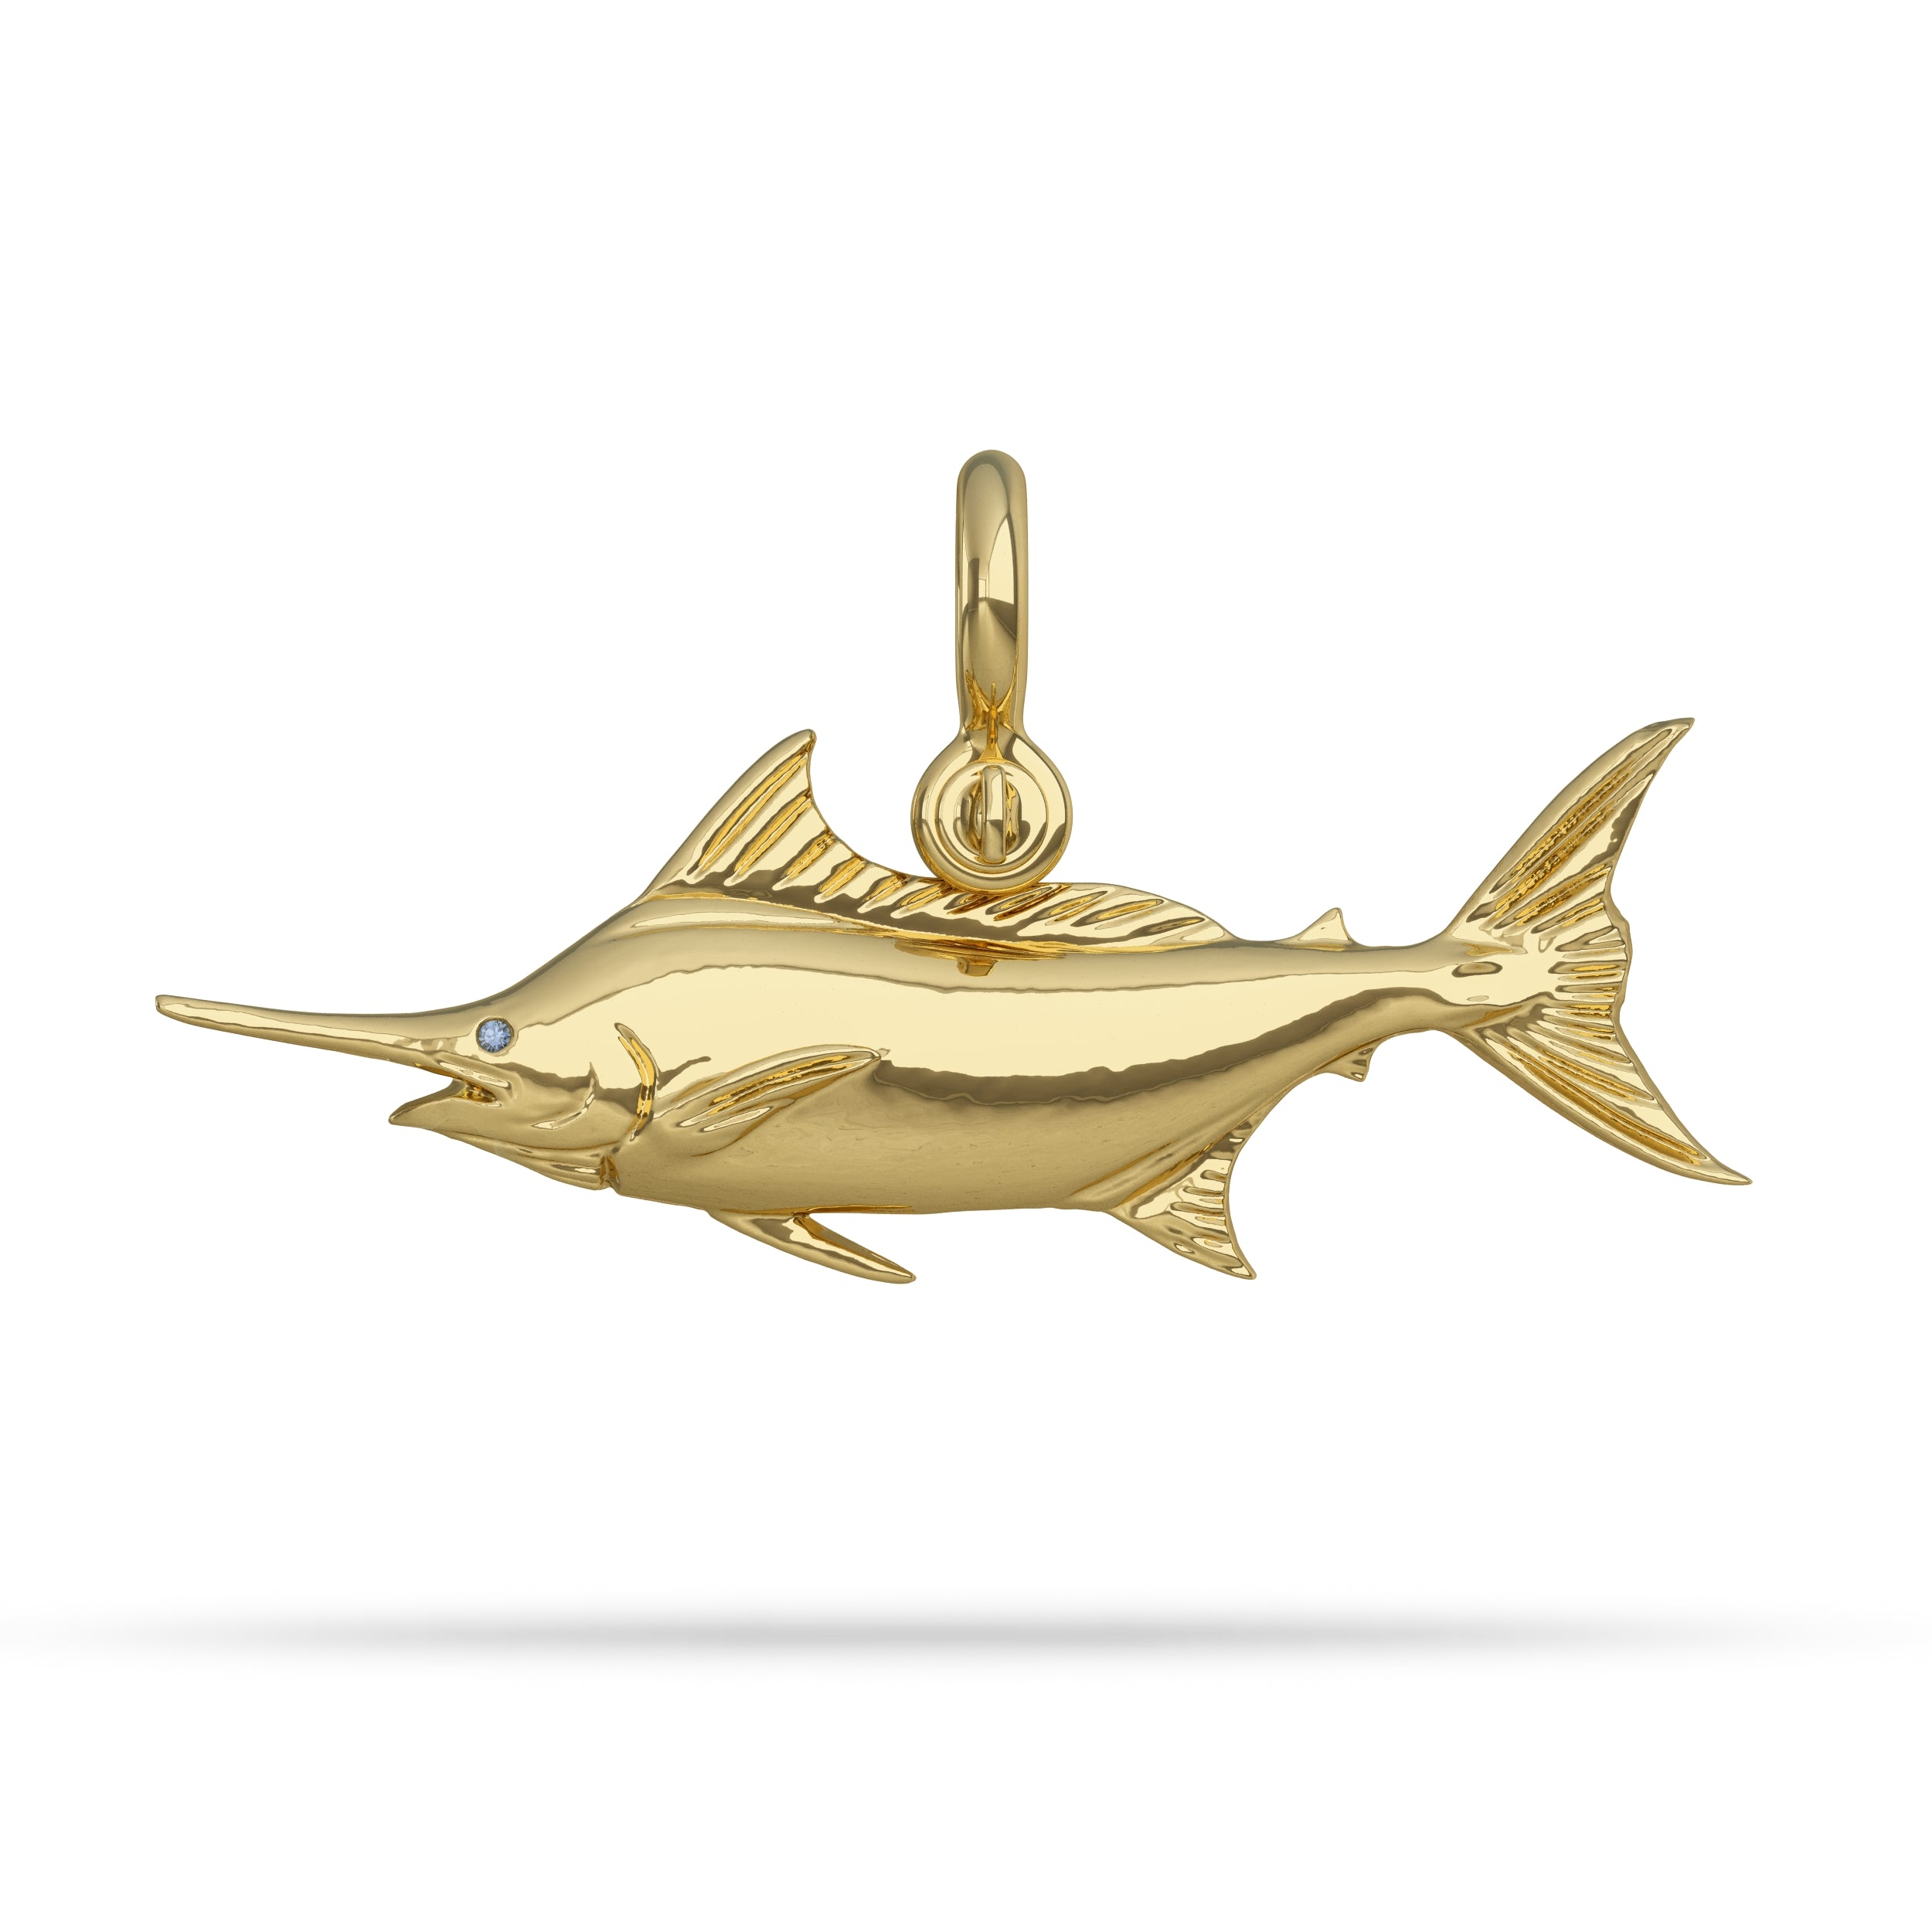 Solid 14k Gold Blue Marlin Jewelry Pendant High Polished Mirror Finish With Blue Sapphire Eye with A Mariner Shackle Bail Custom Designed By Nautical Treasure Jewelry In The Florida Keys Islamorada 